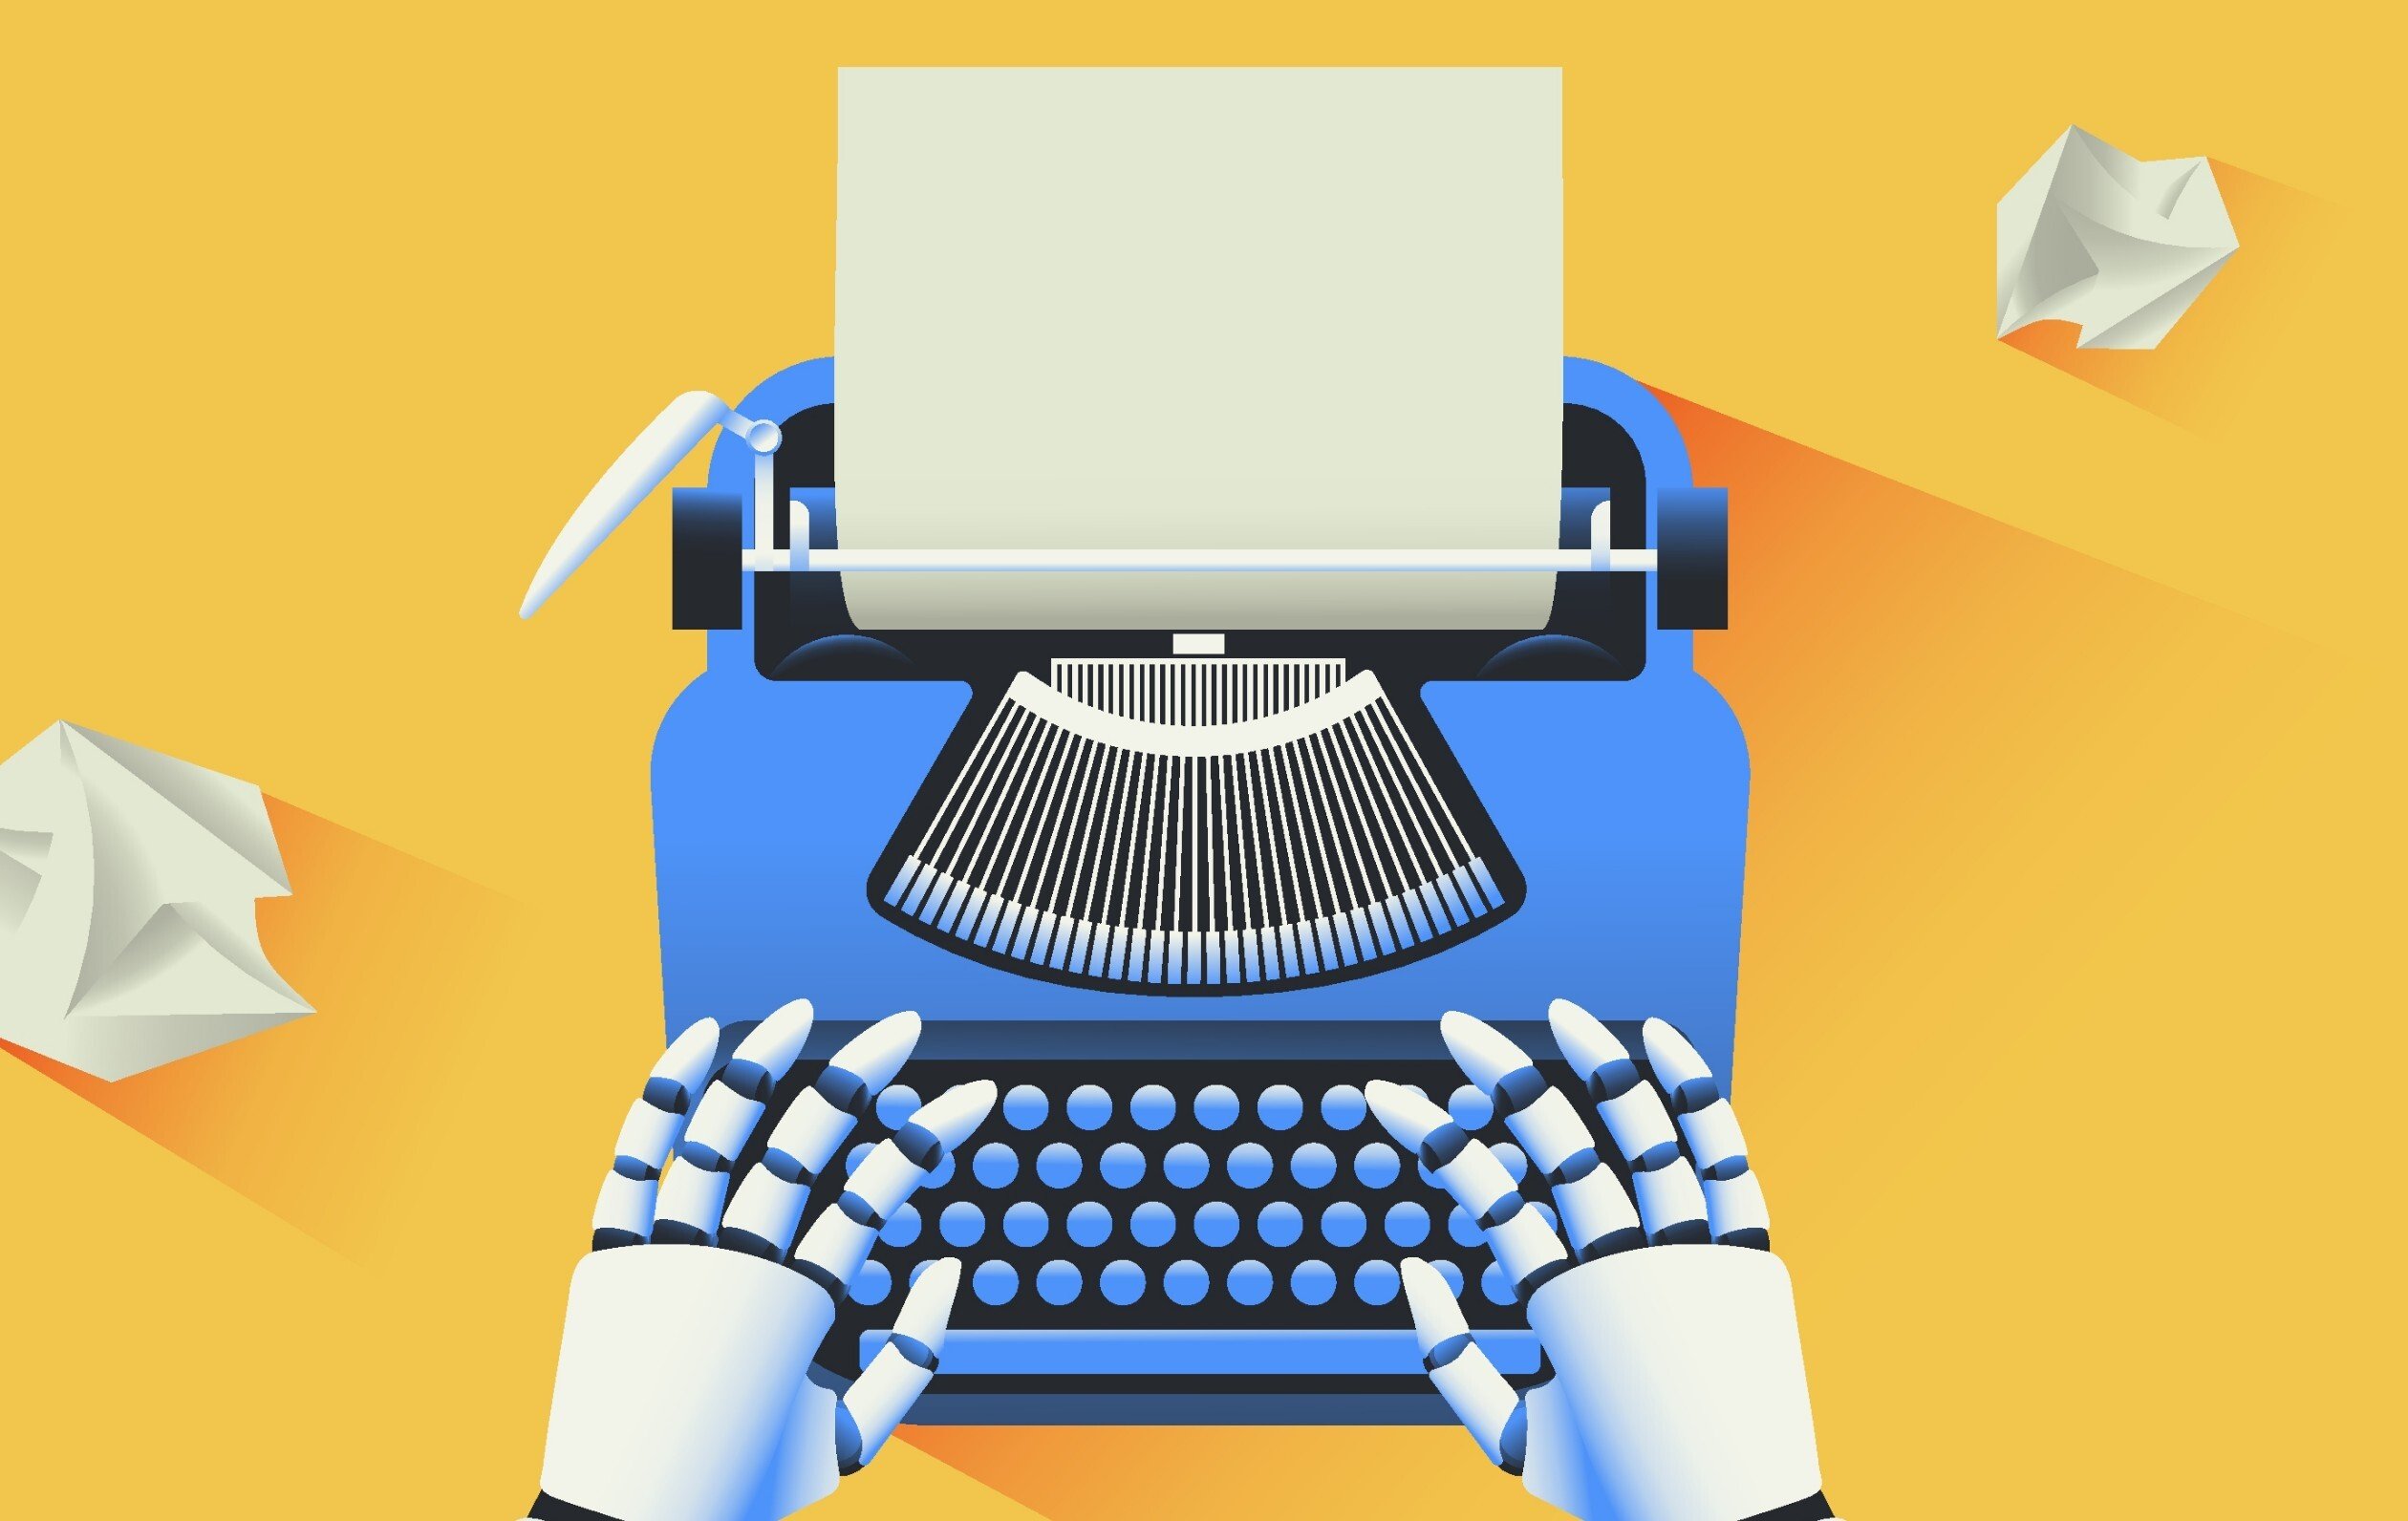 Illustration of robot hands typing on a manual typewriter.